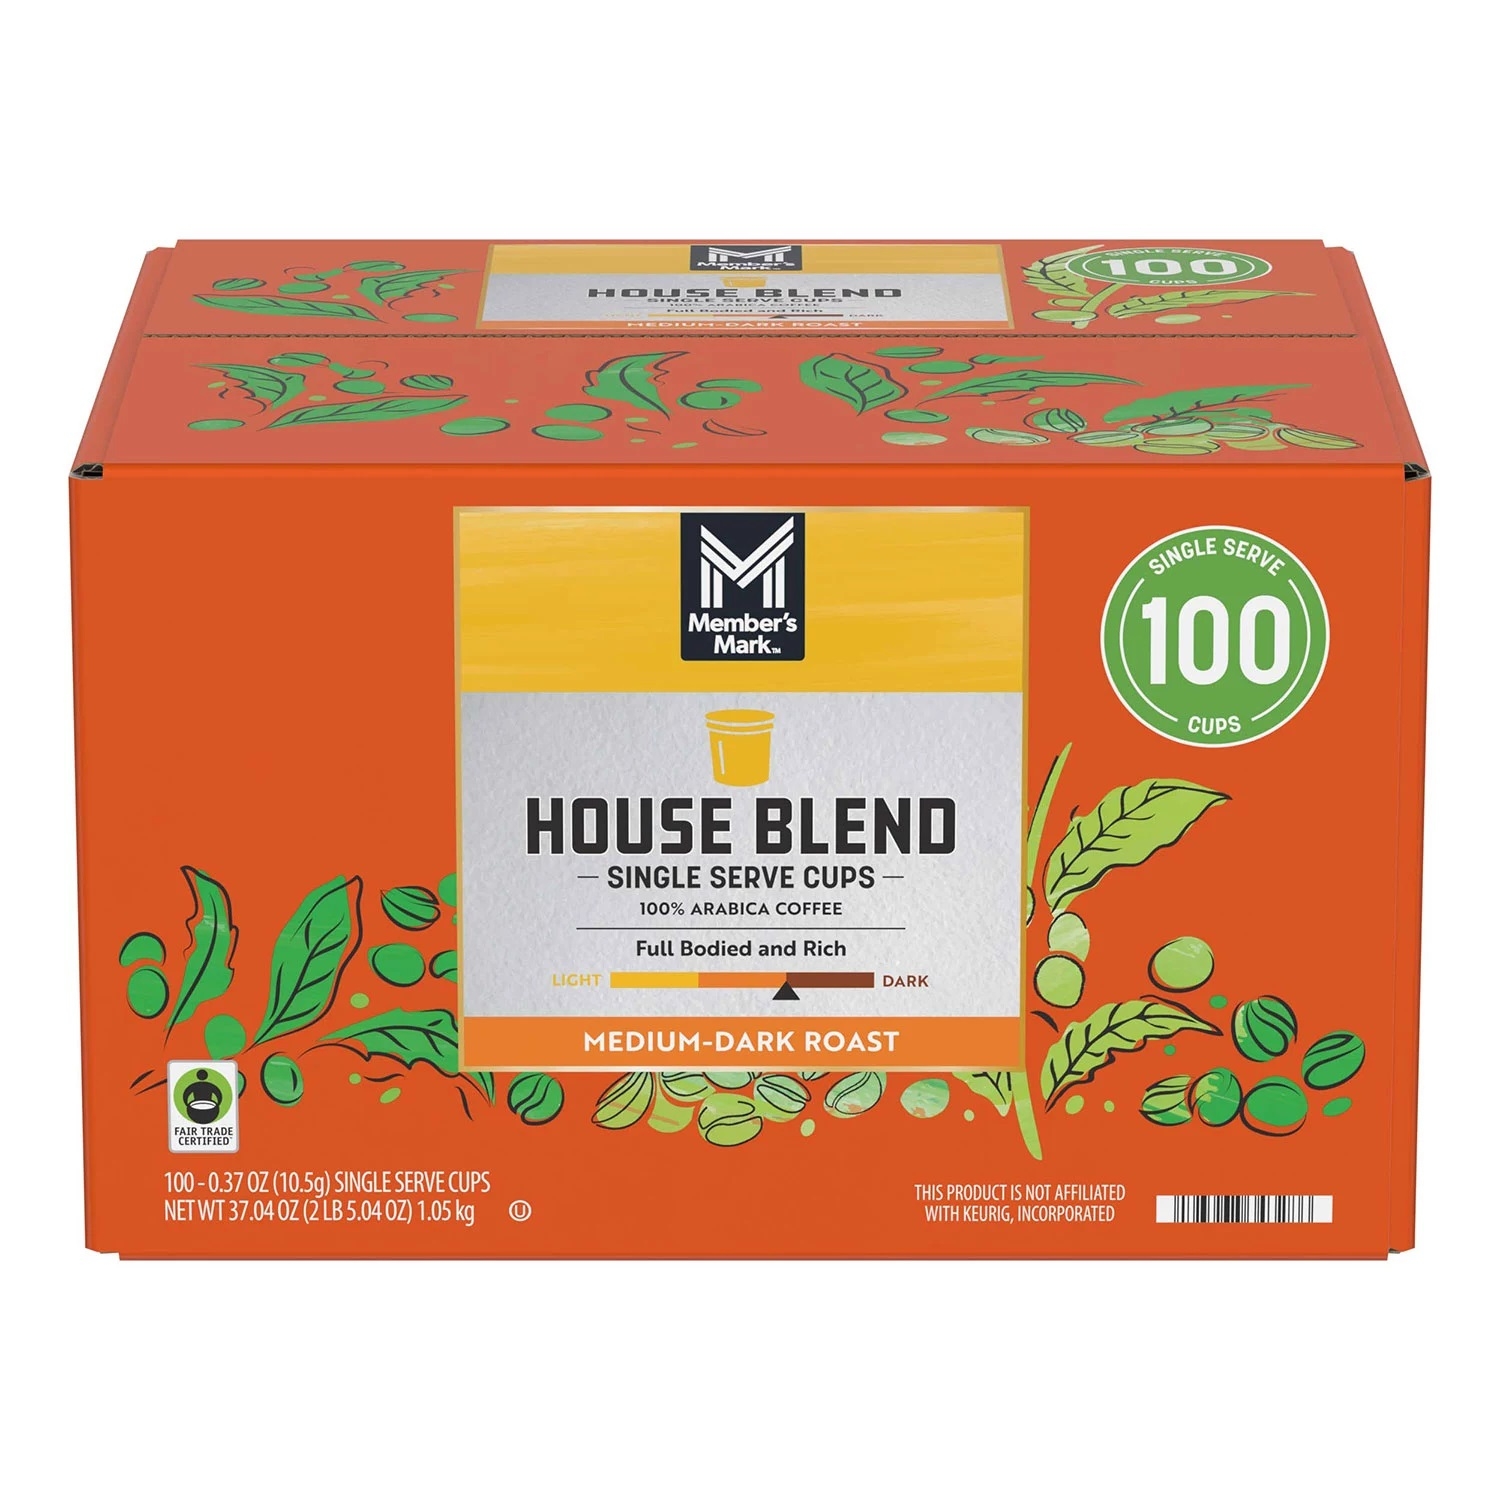 Member's Mark Single-Serve Cups, House Blend (100 Count)